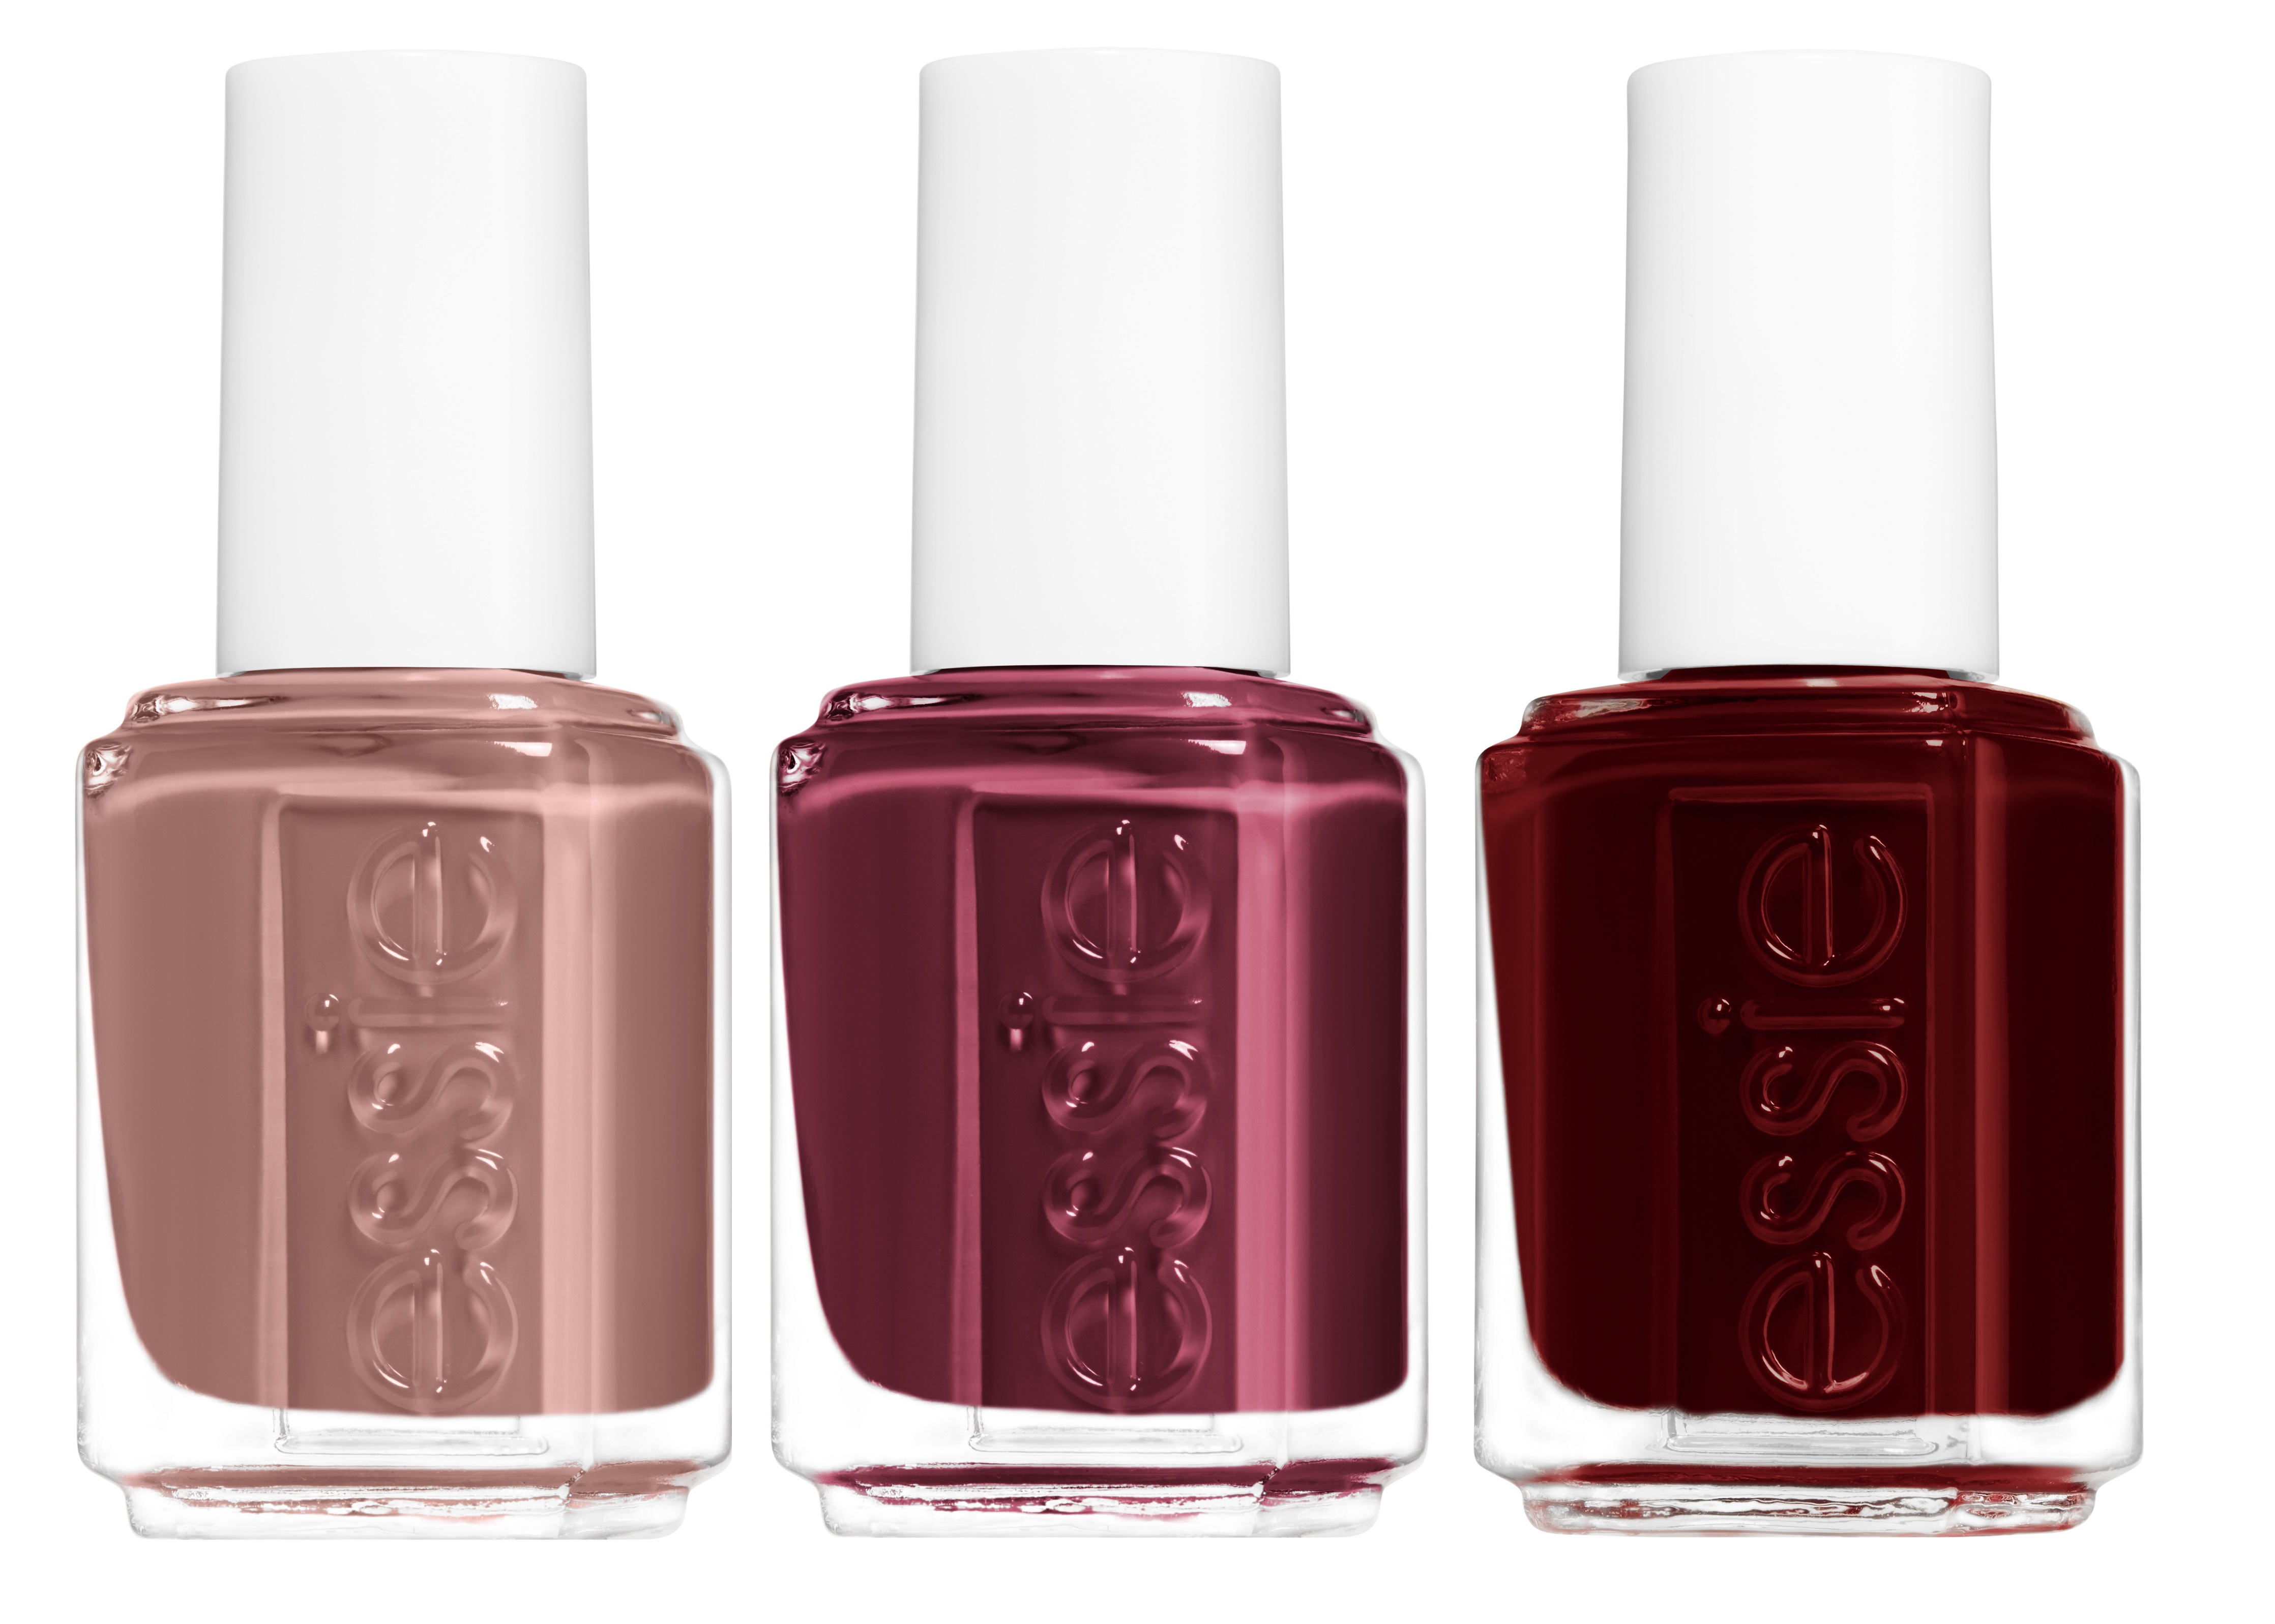 2. "Unexpected Pairings" Nail Polish Set by Essie - wide 8